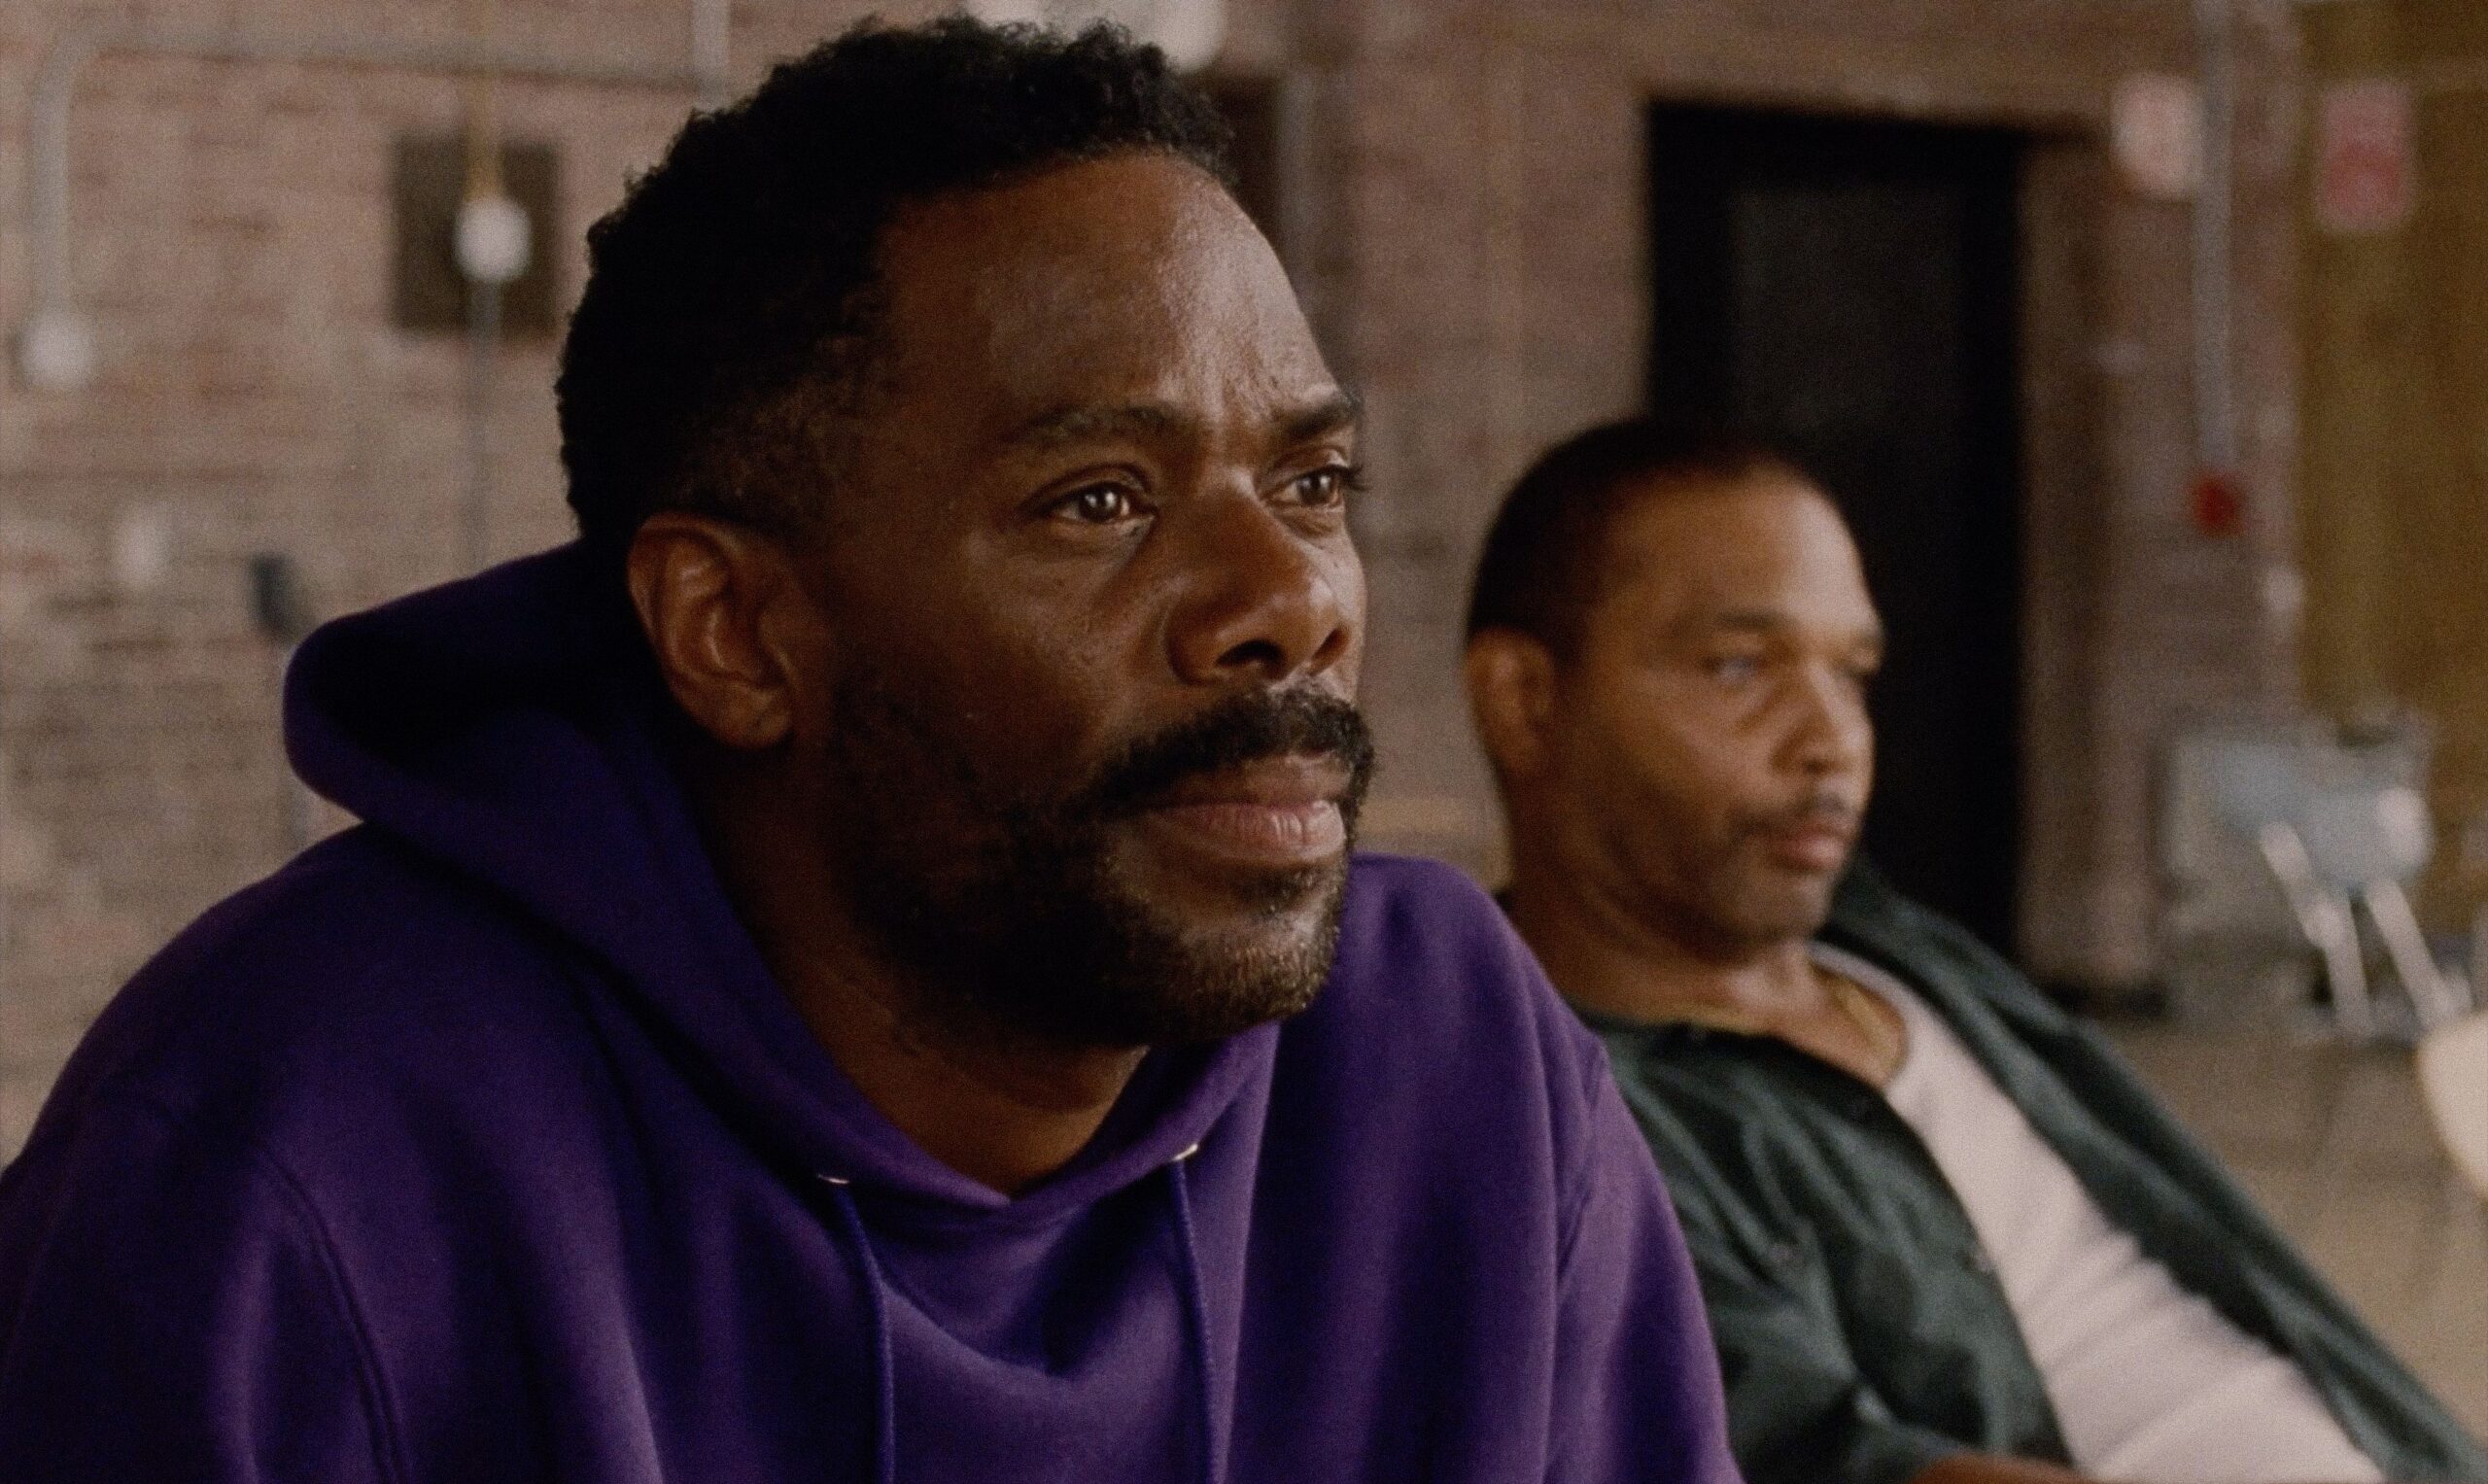 'Sing Sing' Trailer: Oscar Nominee Colman Domingo Seems Primed For Another Nod In A24 Film